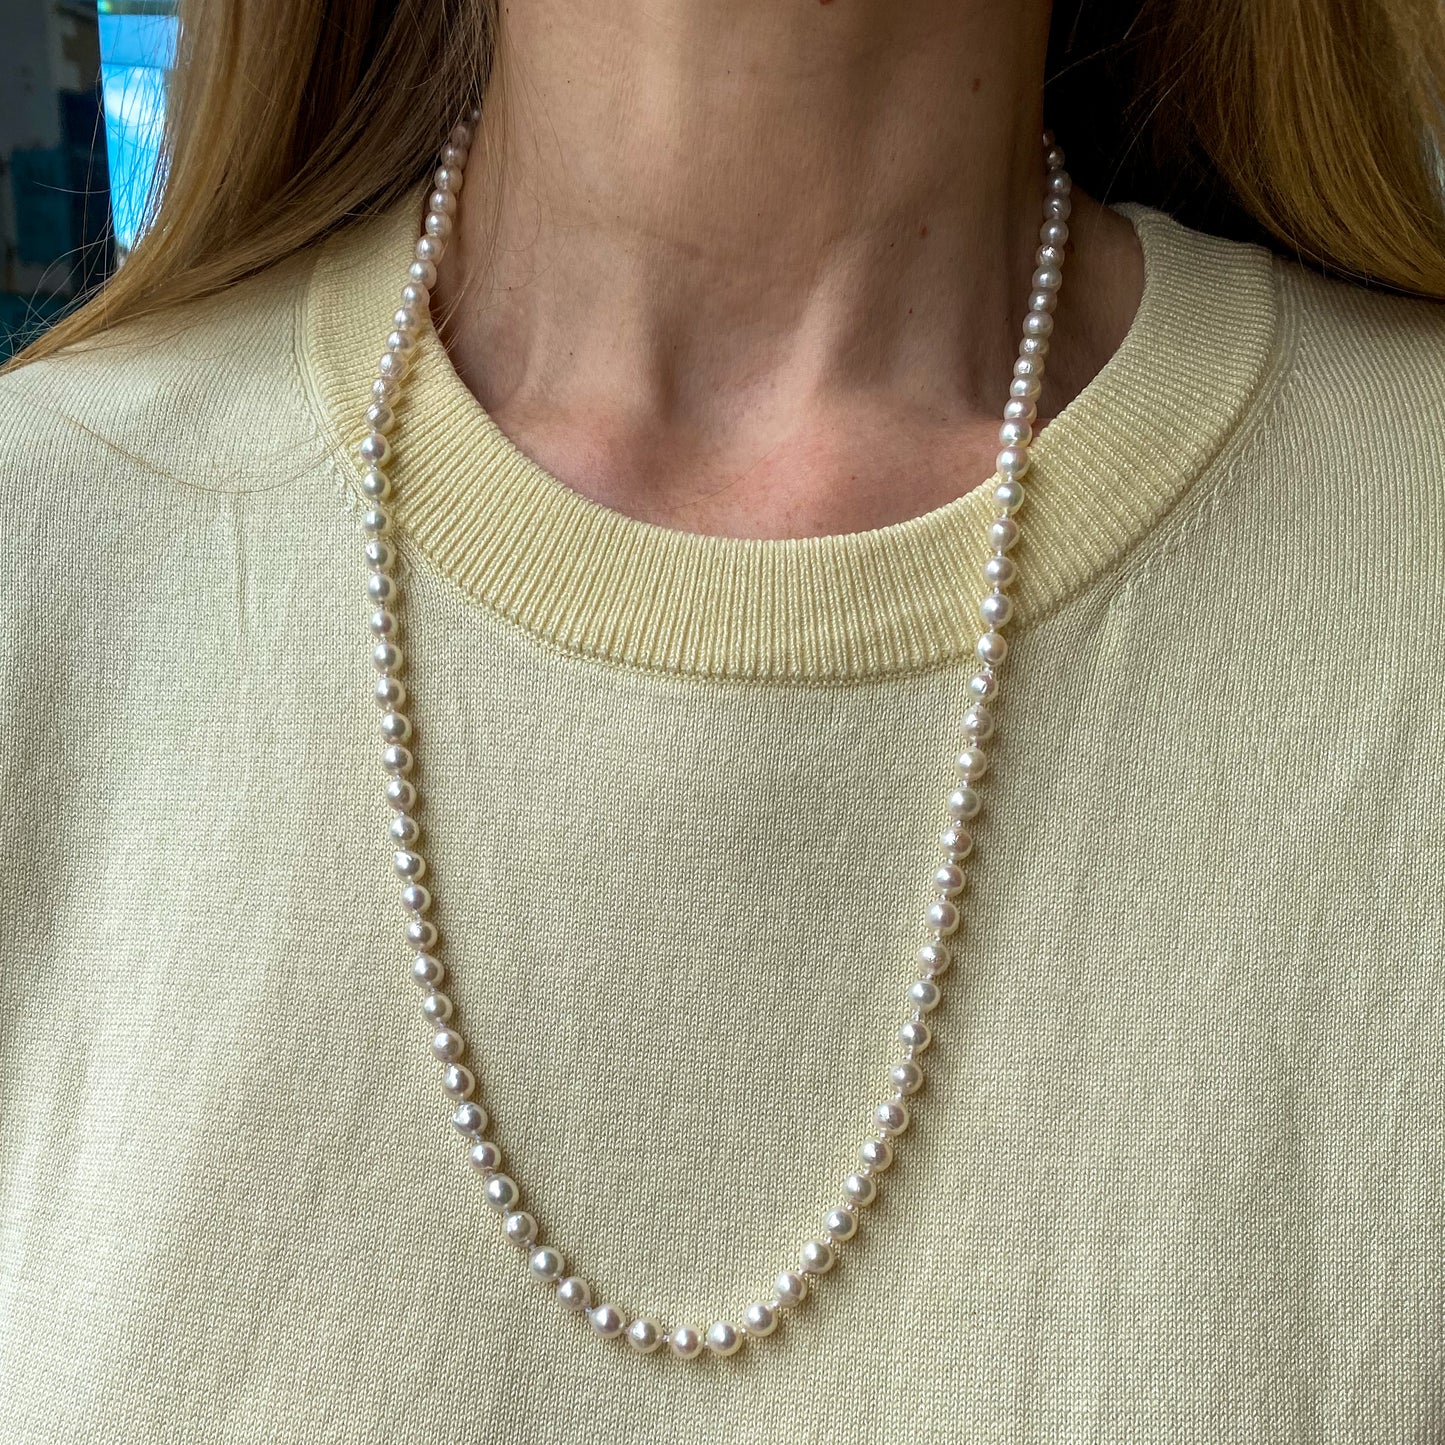 9ct Gold 28" Akoya Cultured Pearl Necklace - John Ross Jewellers